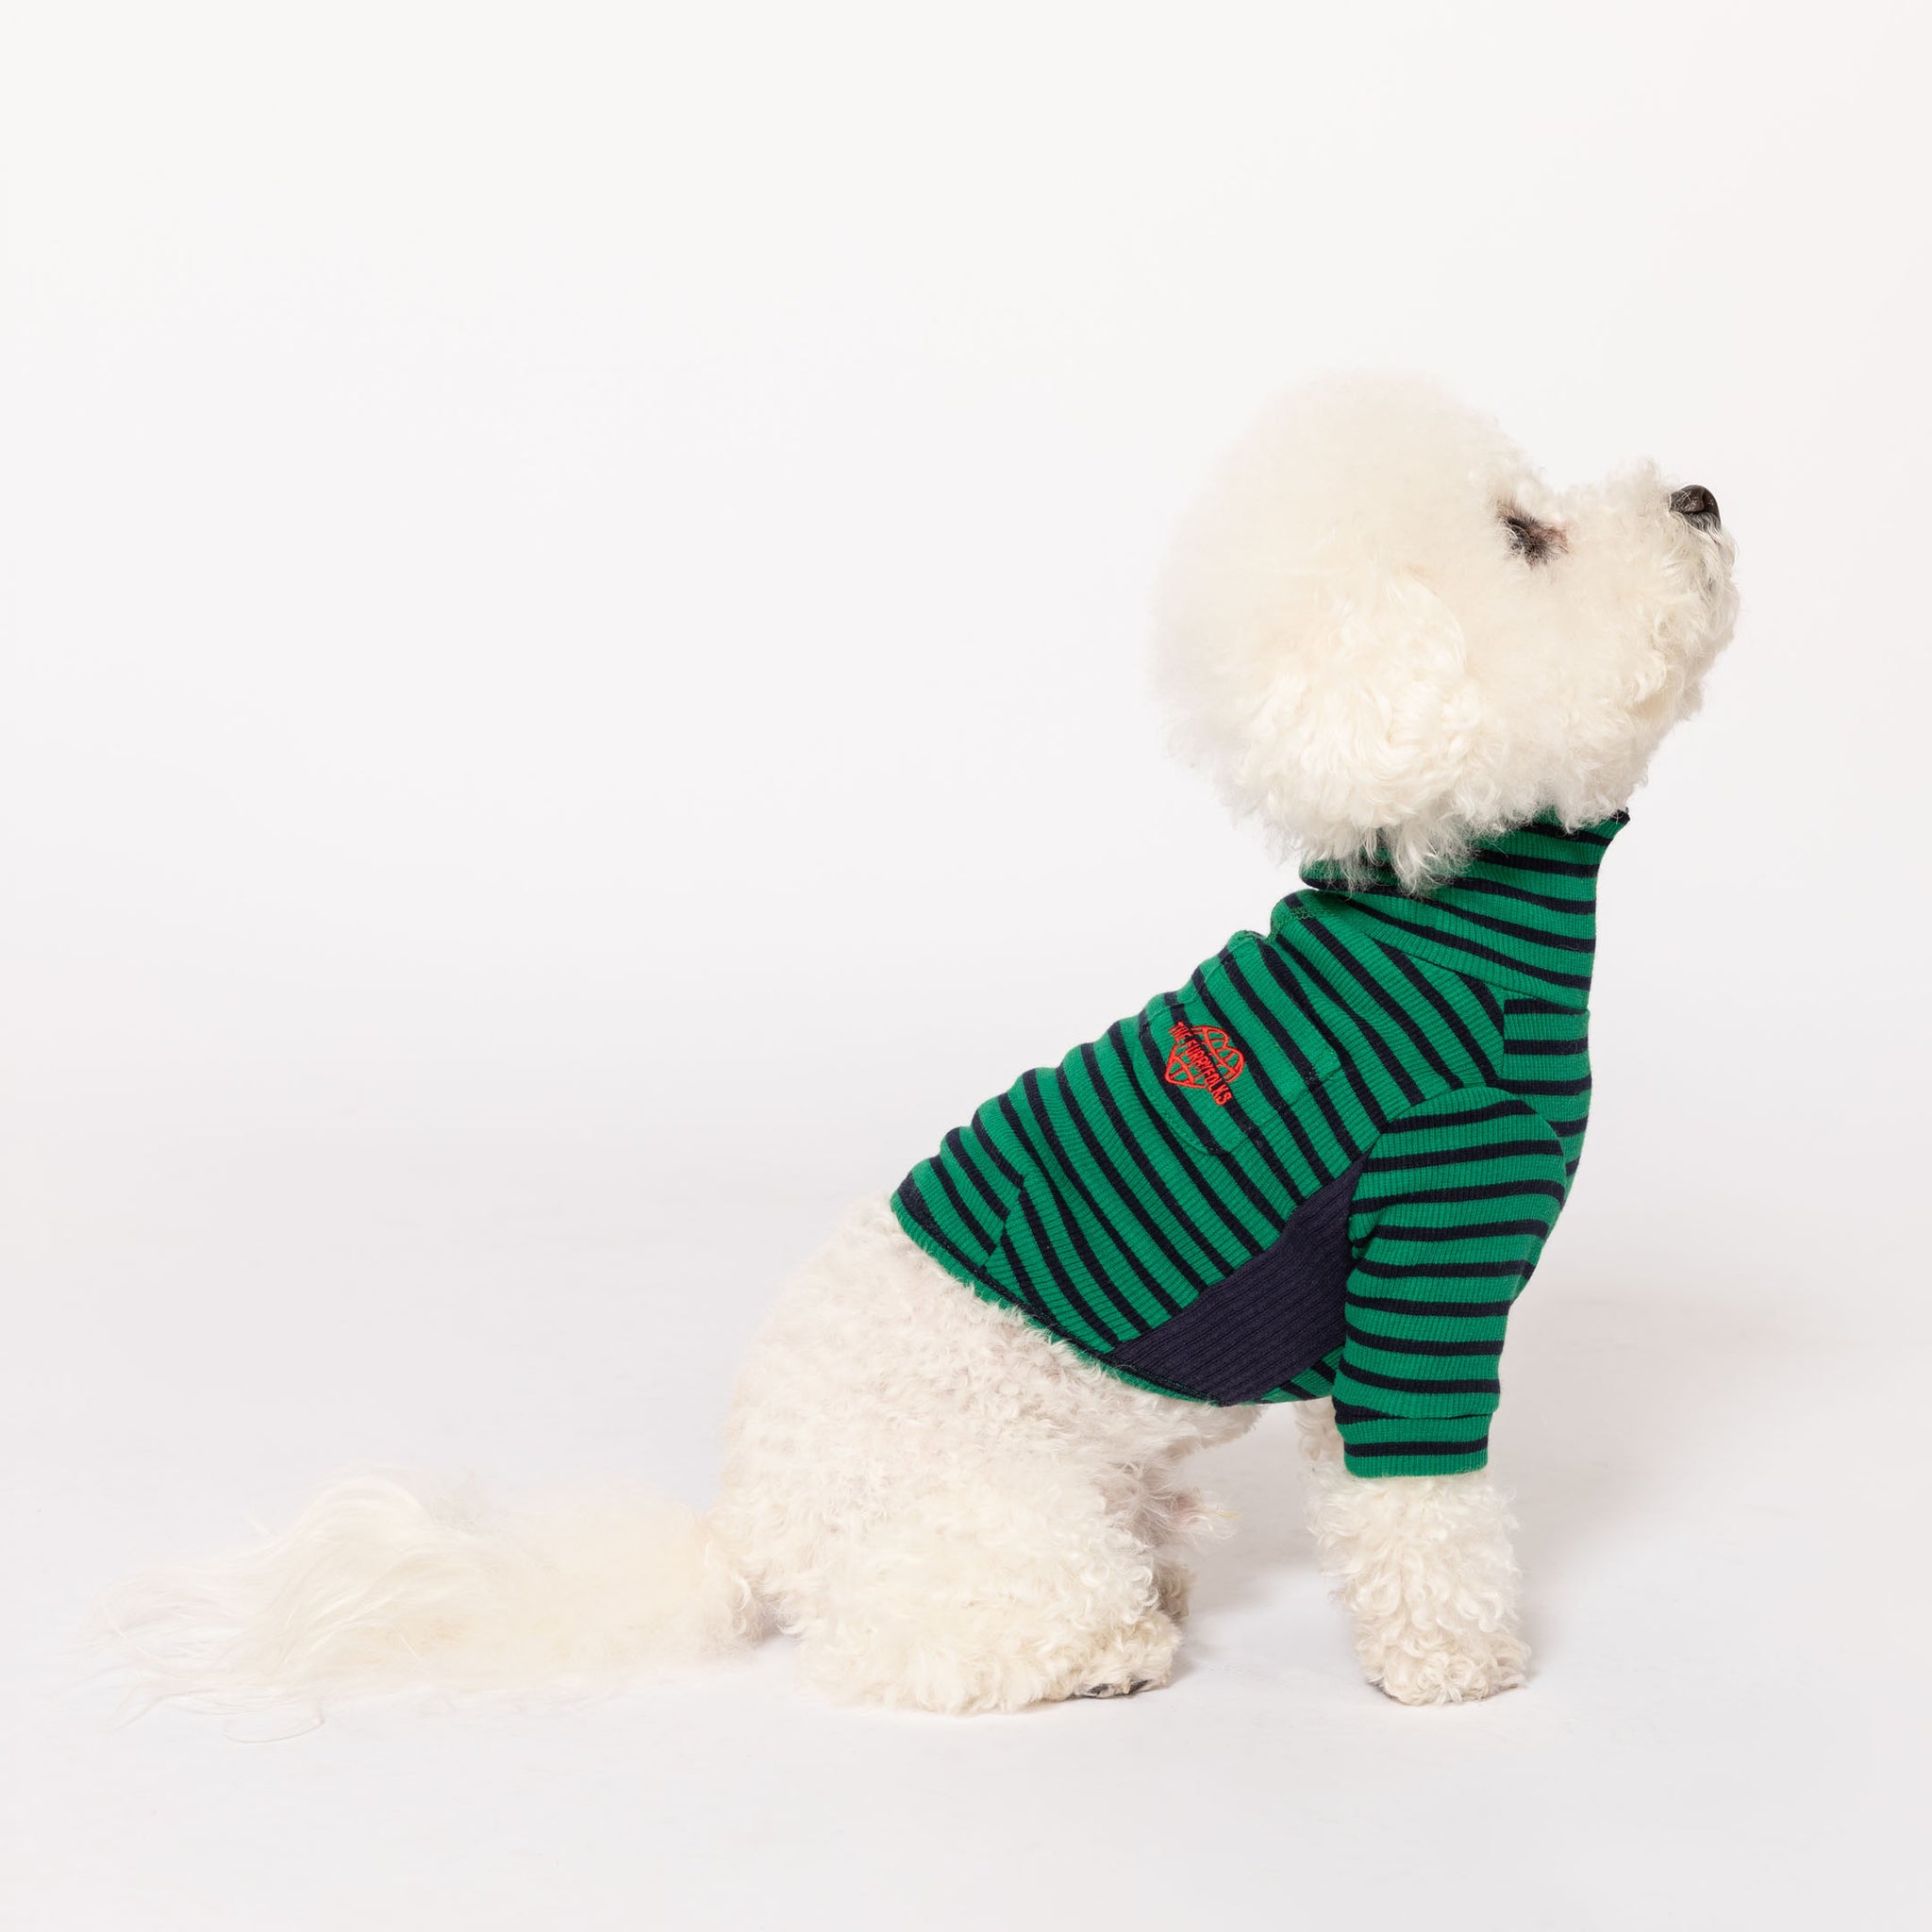 Shop our Dog V-Neck Stripe Tee for Classic Fashion with a Preppy Twist. Made from High-Quality Material with Artisan Finish. Perfect for Timeless Style!